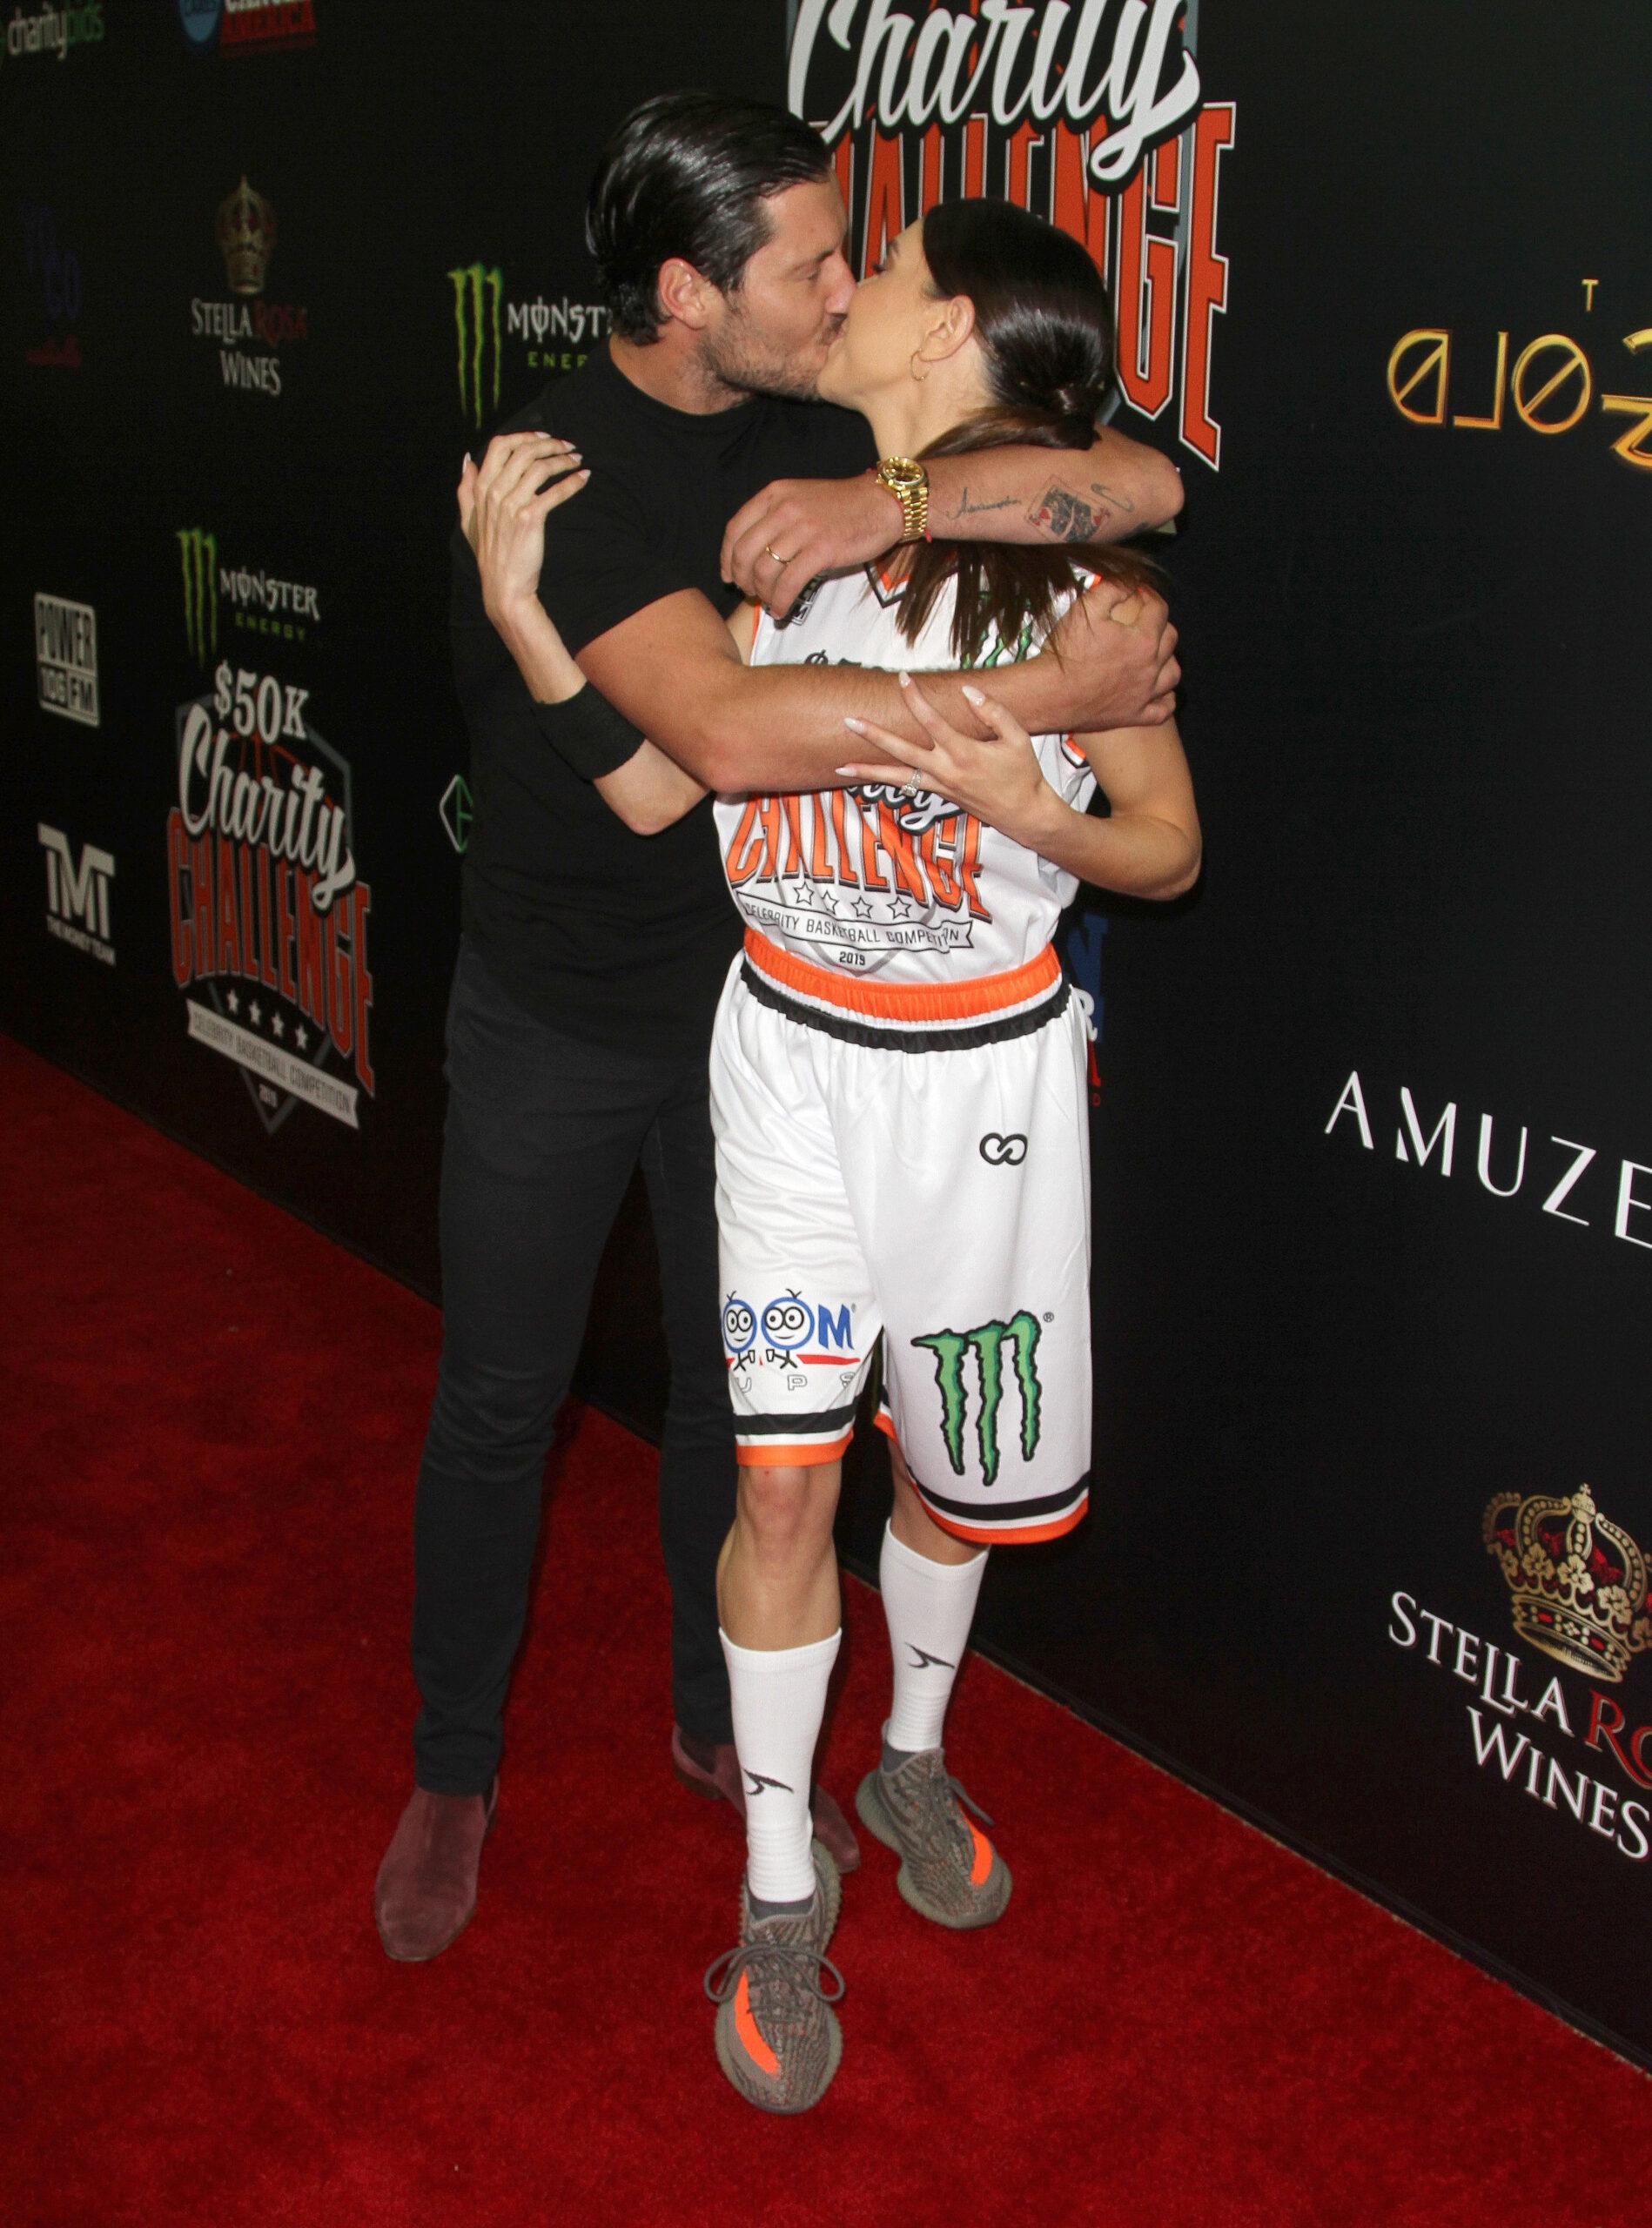 Val Chmerkovskiy and Jenna Johnson Monster Energy $50K Charity Challenge Basketball Game in Los Angeles